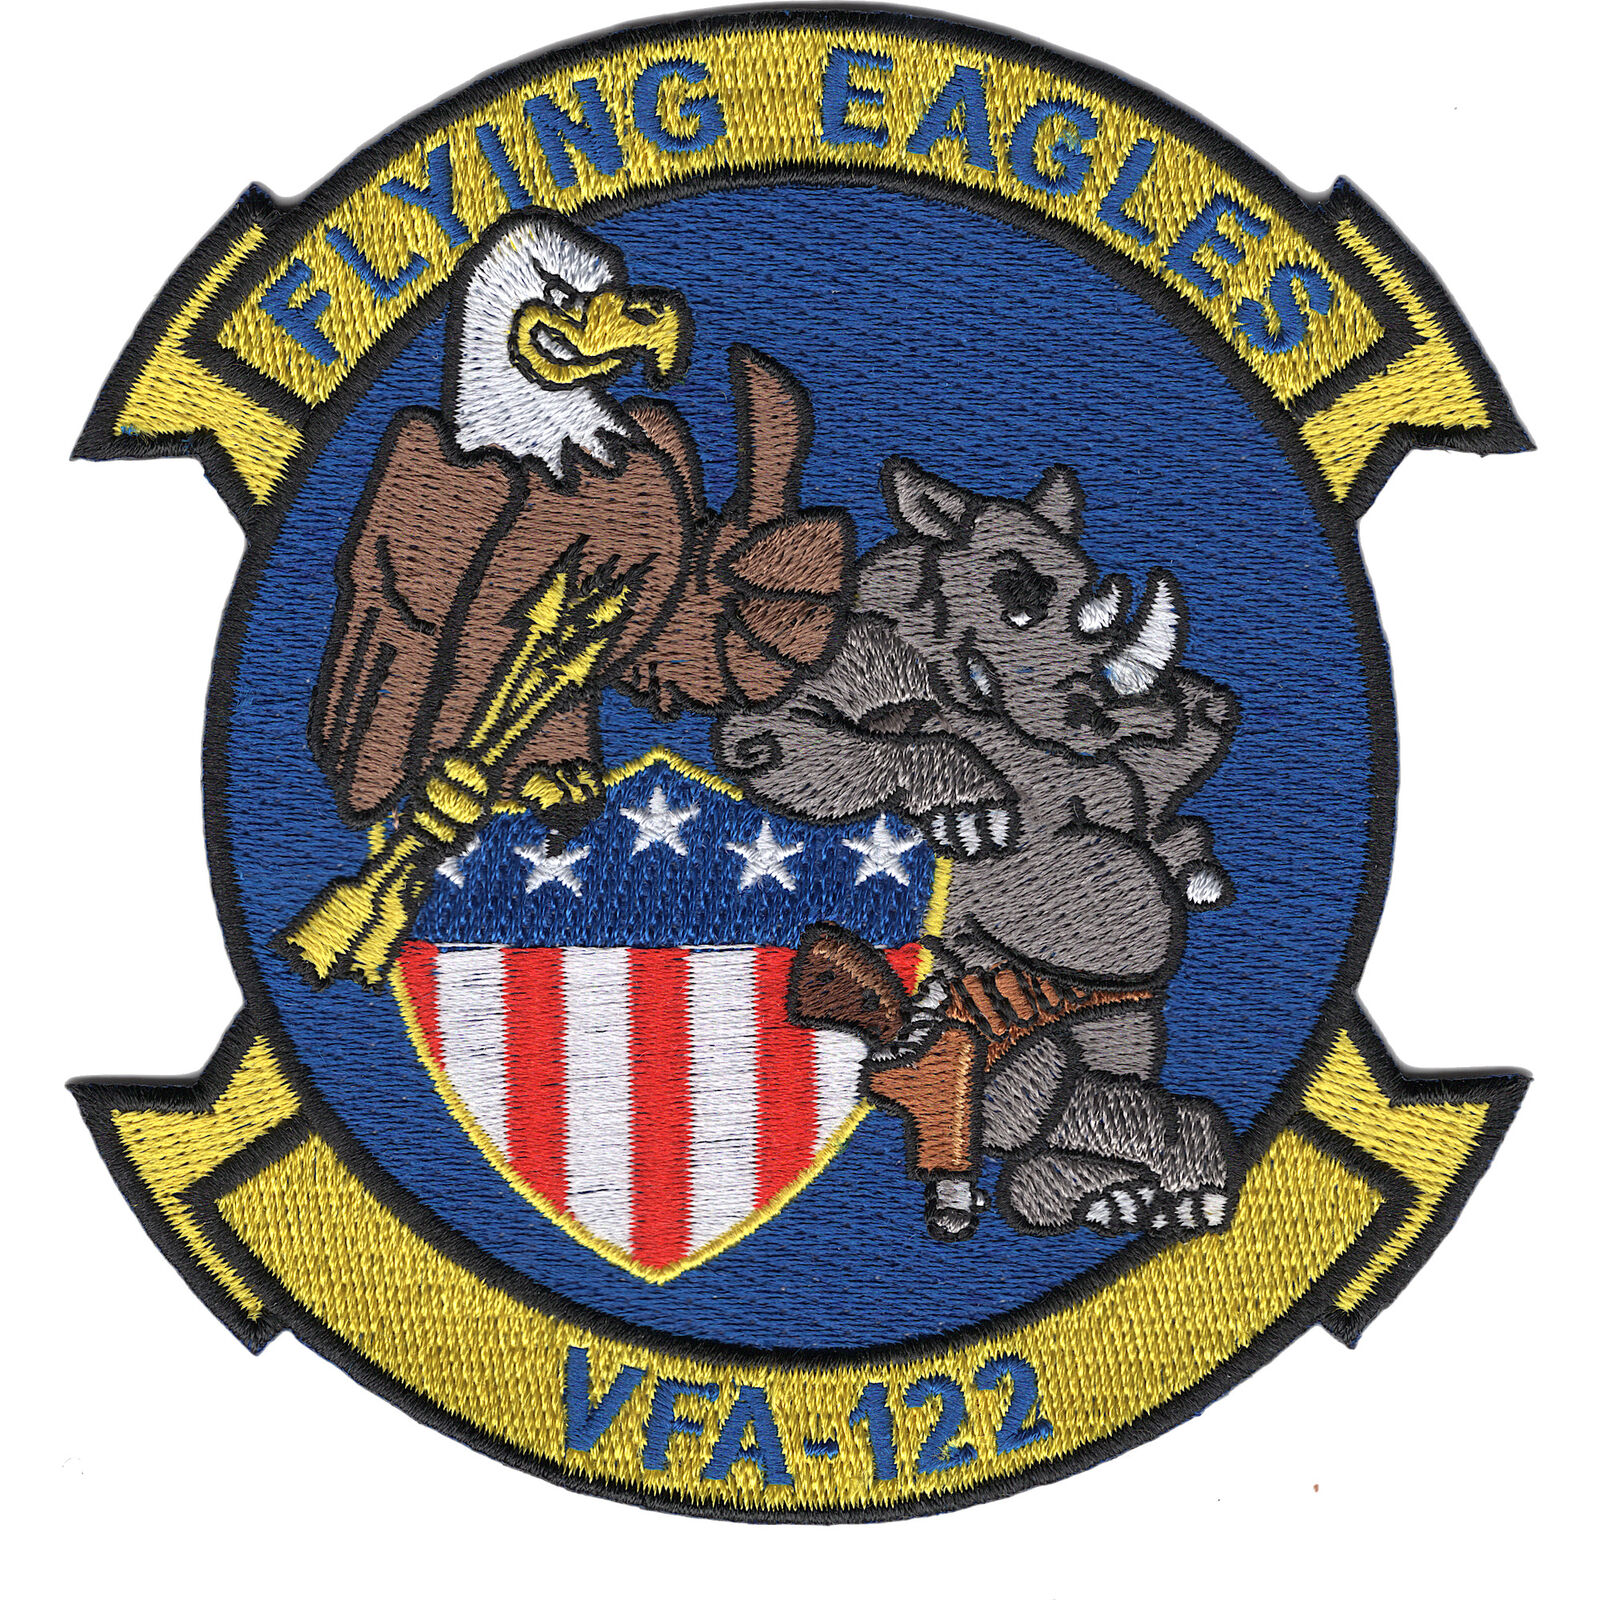 VFA-122 Flying Eagles Patch - Rhino Strike Fighter Squadron